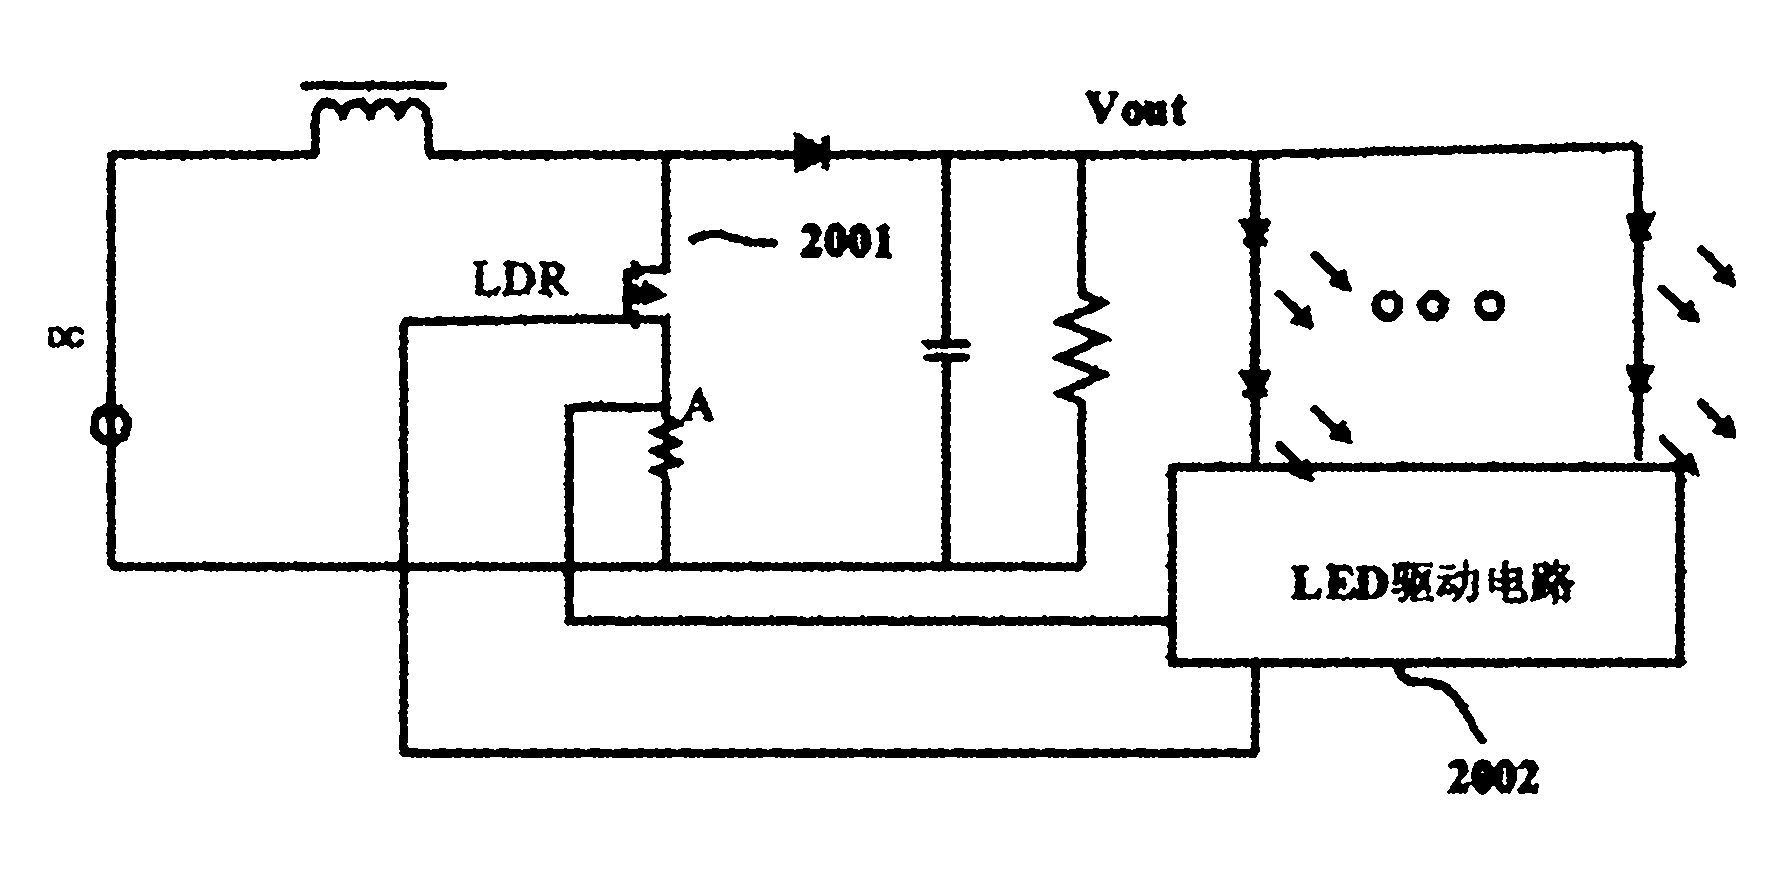 LED (light emitting diode) constant current driving circuit with current detection and LED backlight system